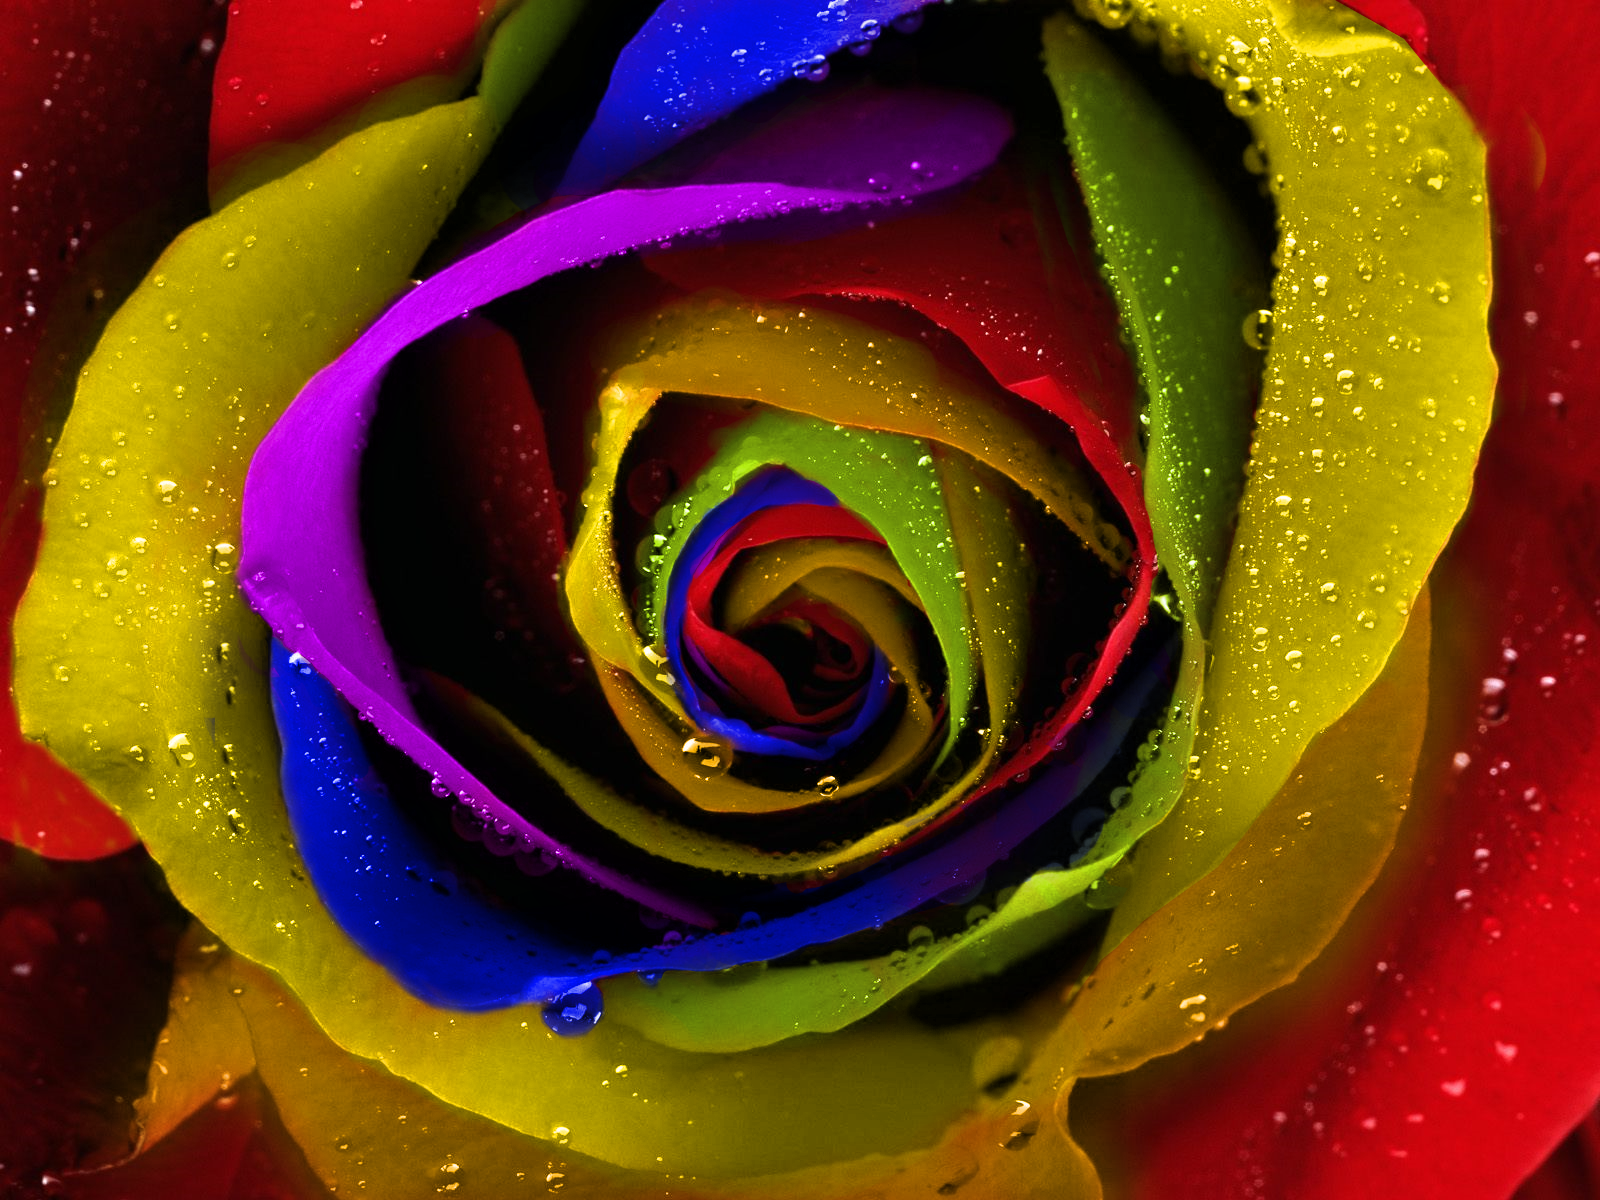 Rainbow Roses   Wallpaper High Definition High Quality Widescreen